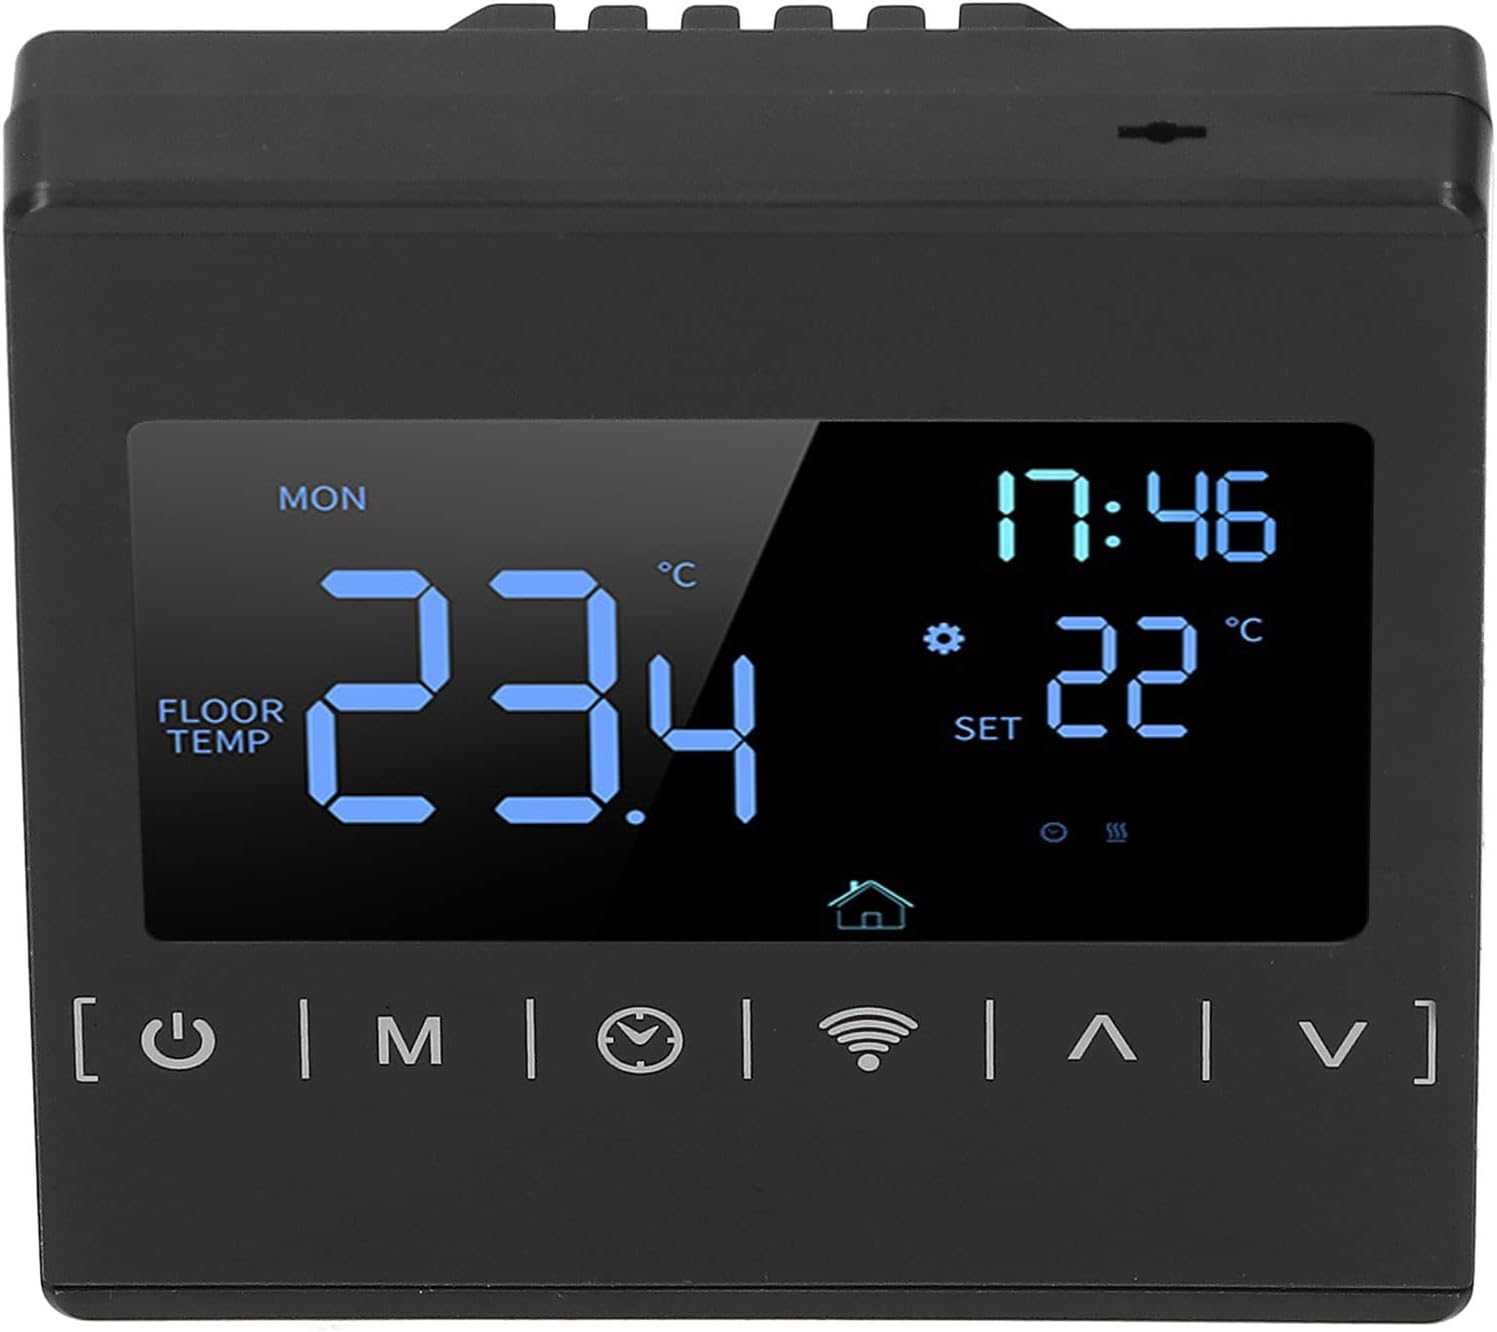 Touch Screen Smart Thermostat, Floor Heating Controller Touch Screen Thermostat WiFi Programmable Industrial, programmable Household thermostats